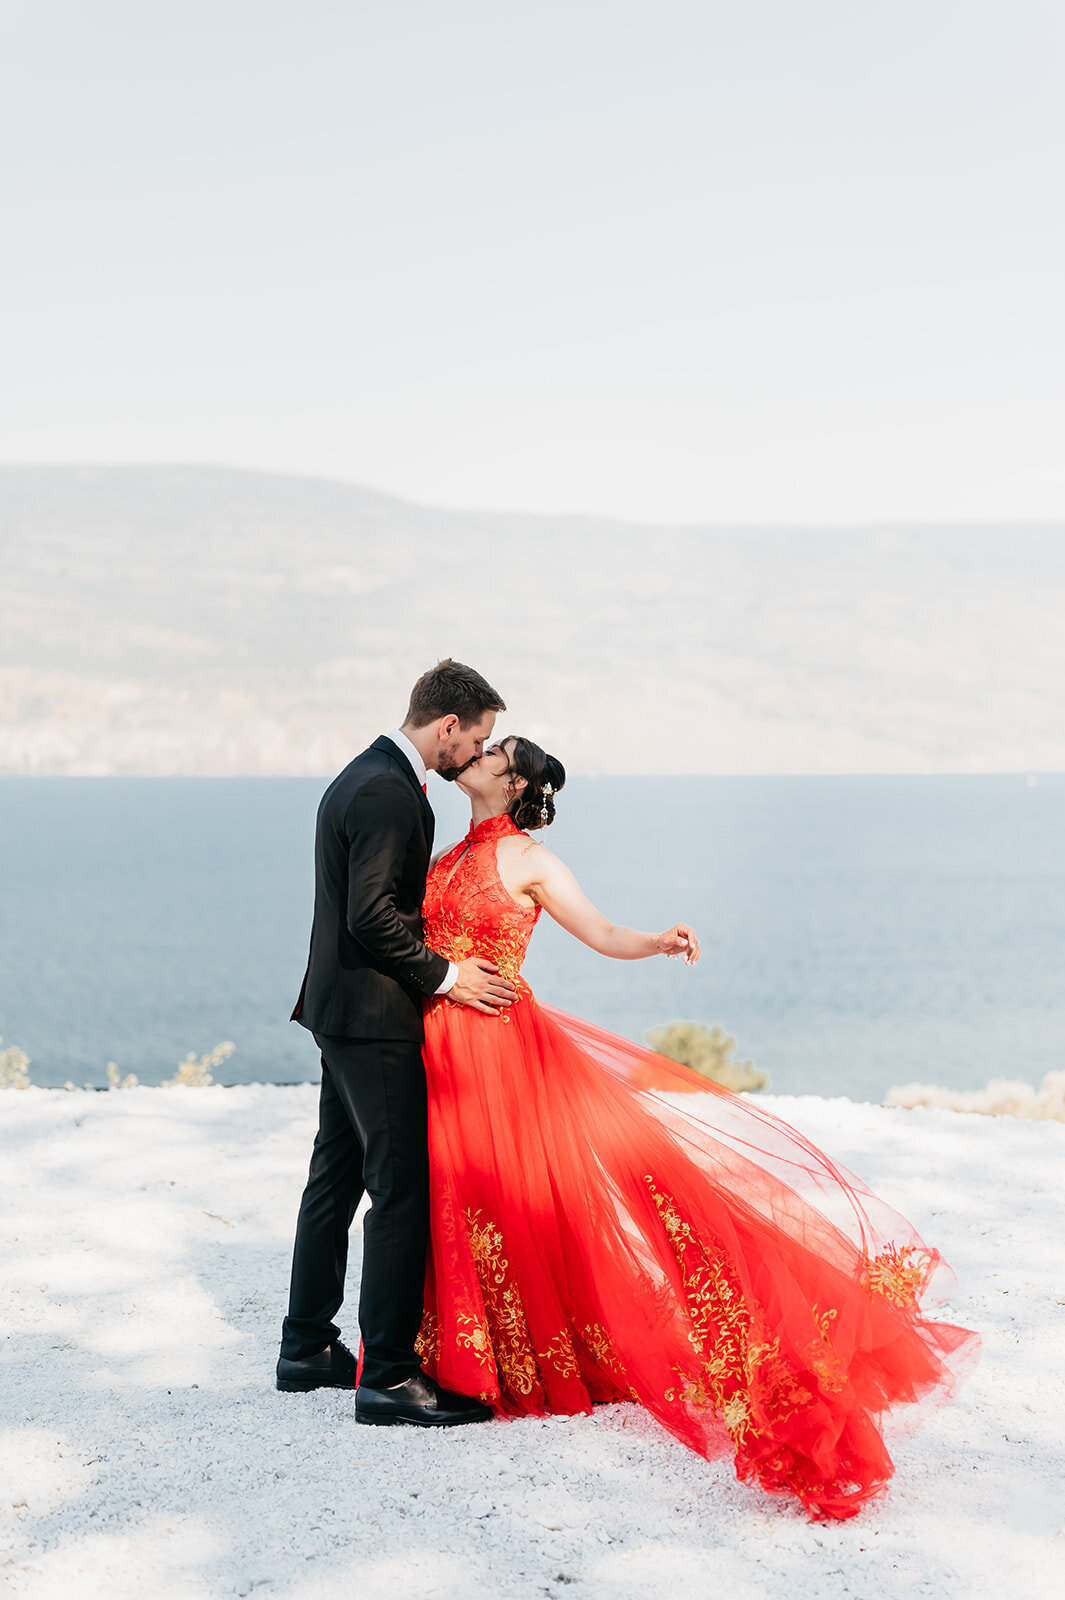 Modern red bridal dress with groom in a black suit on their wedding day.